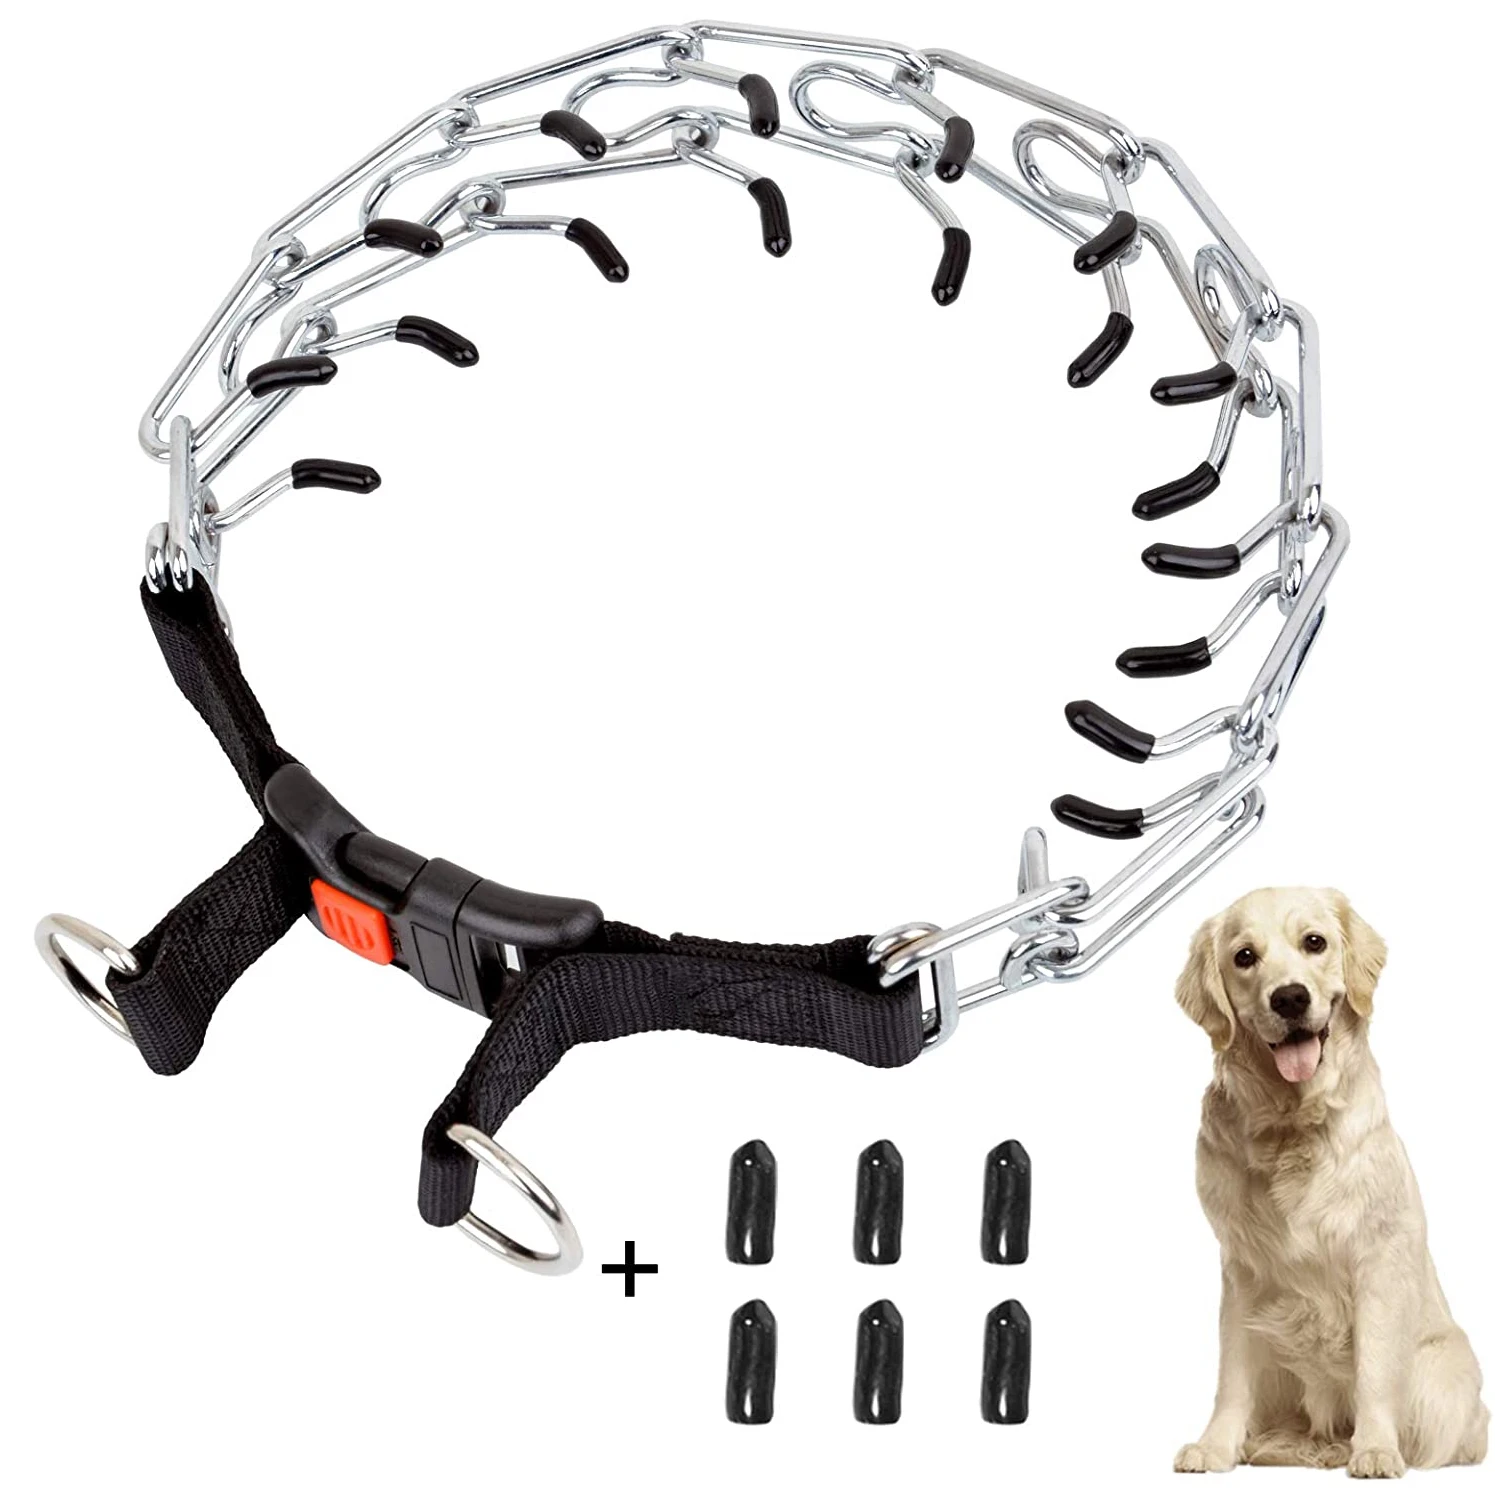 

2021 New Style Dog Training Choke Pinch Collar With Comfort Tips And Quick Release Snap Buckle, Silver+black